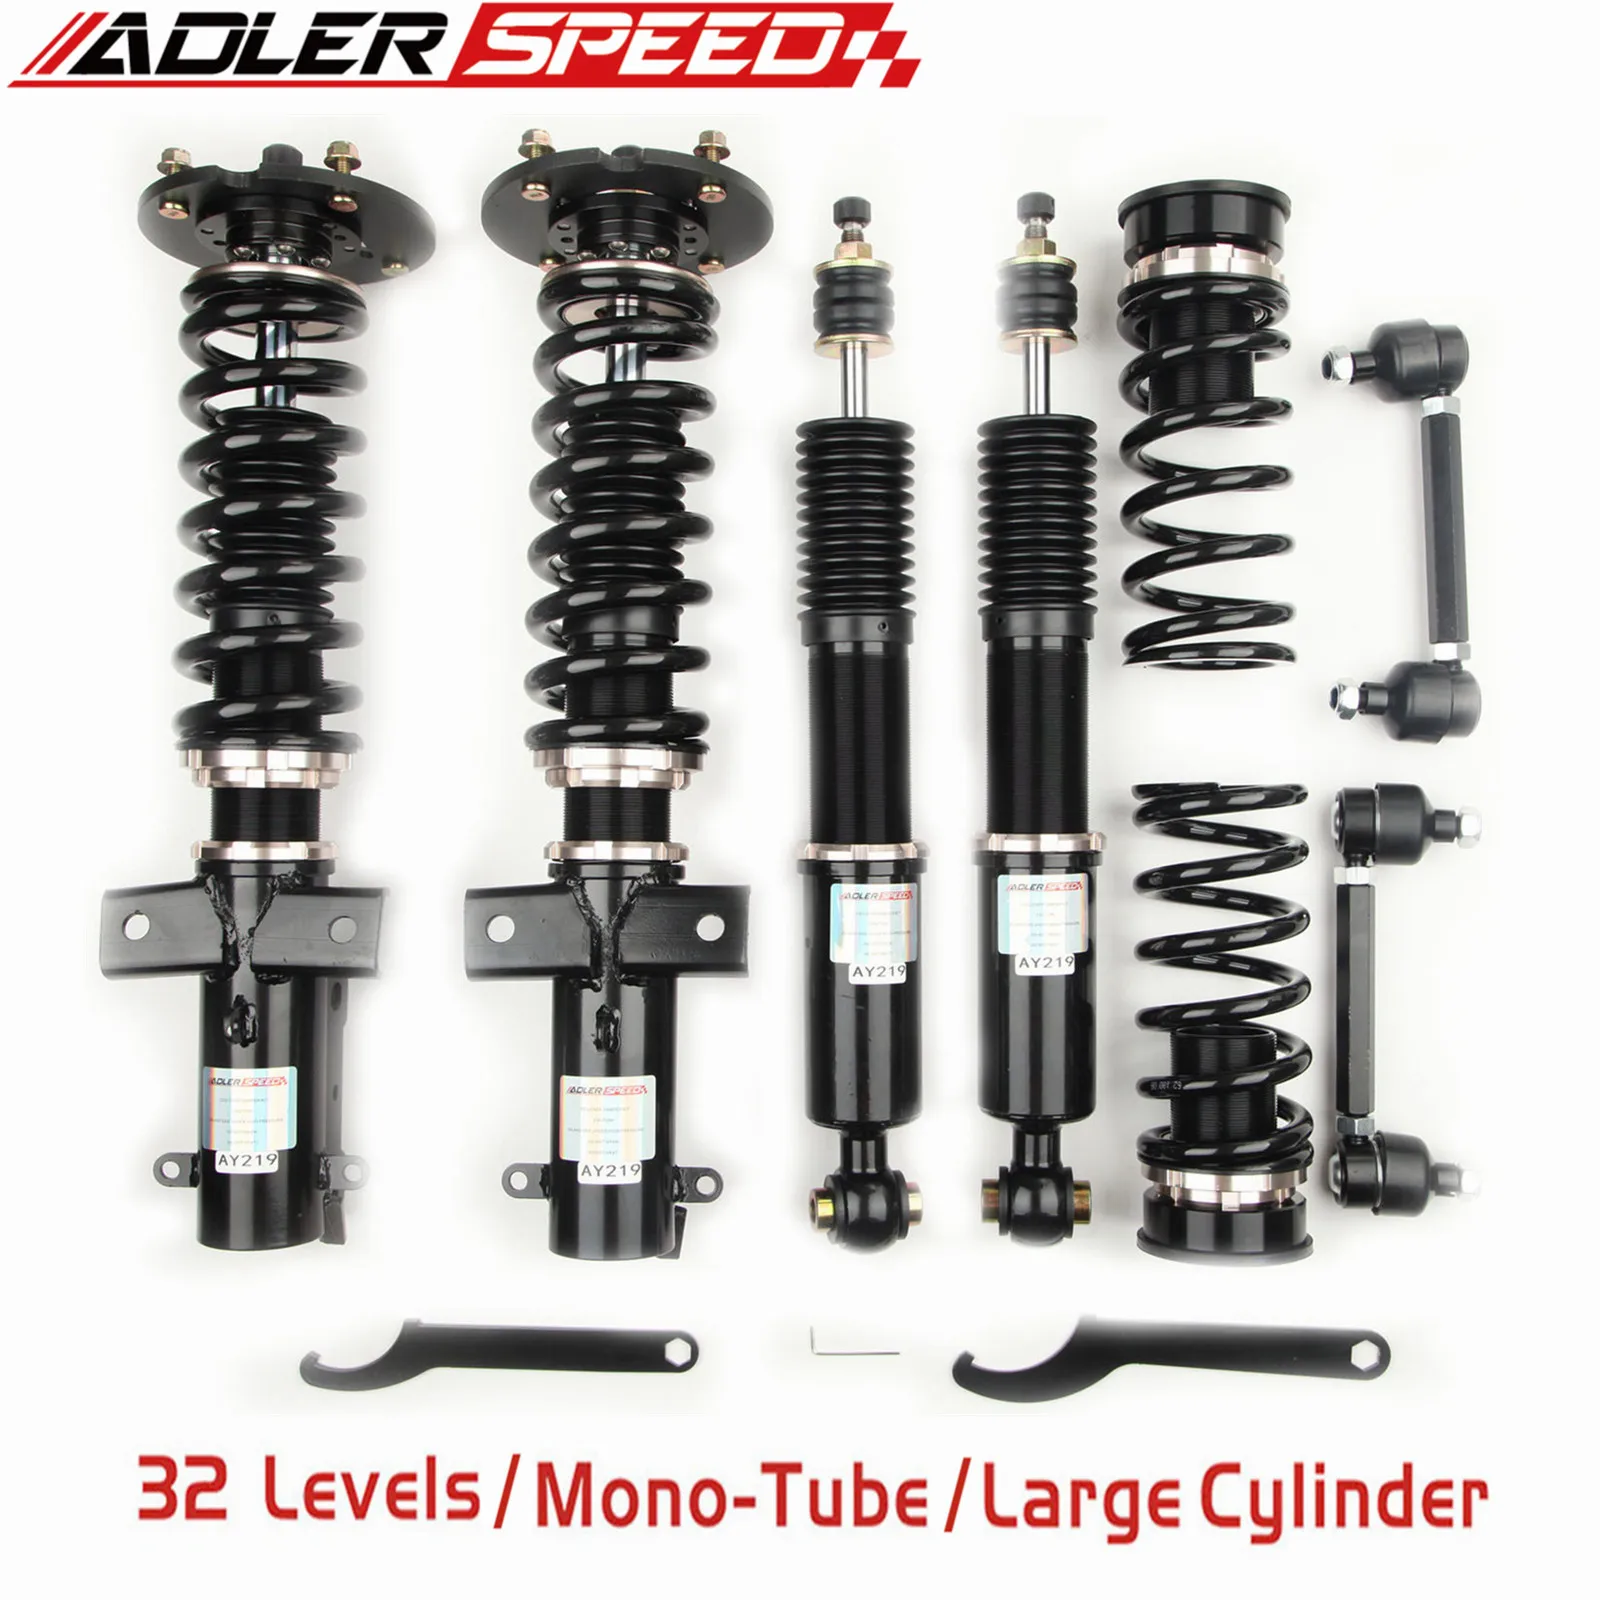 

ADLERSPEED 32 Ways Mono Tube Coilovers Suspension Kit For Ford Mustang 2005-2014